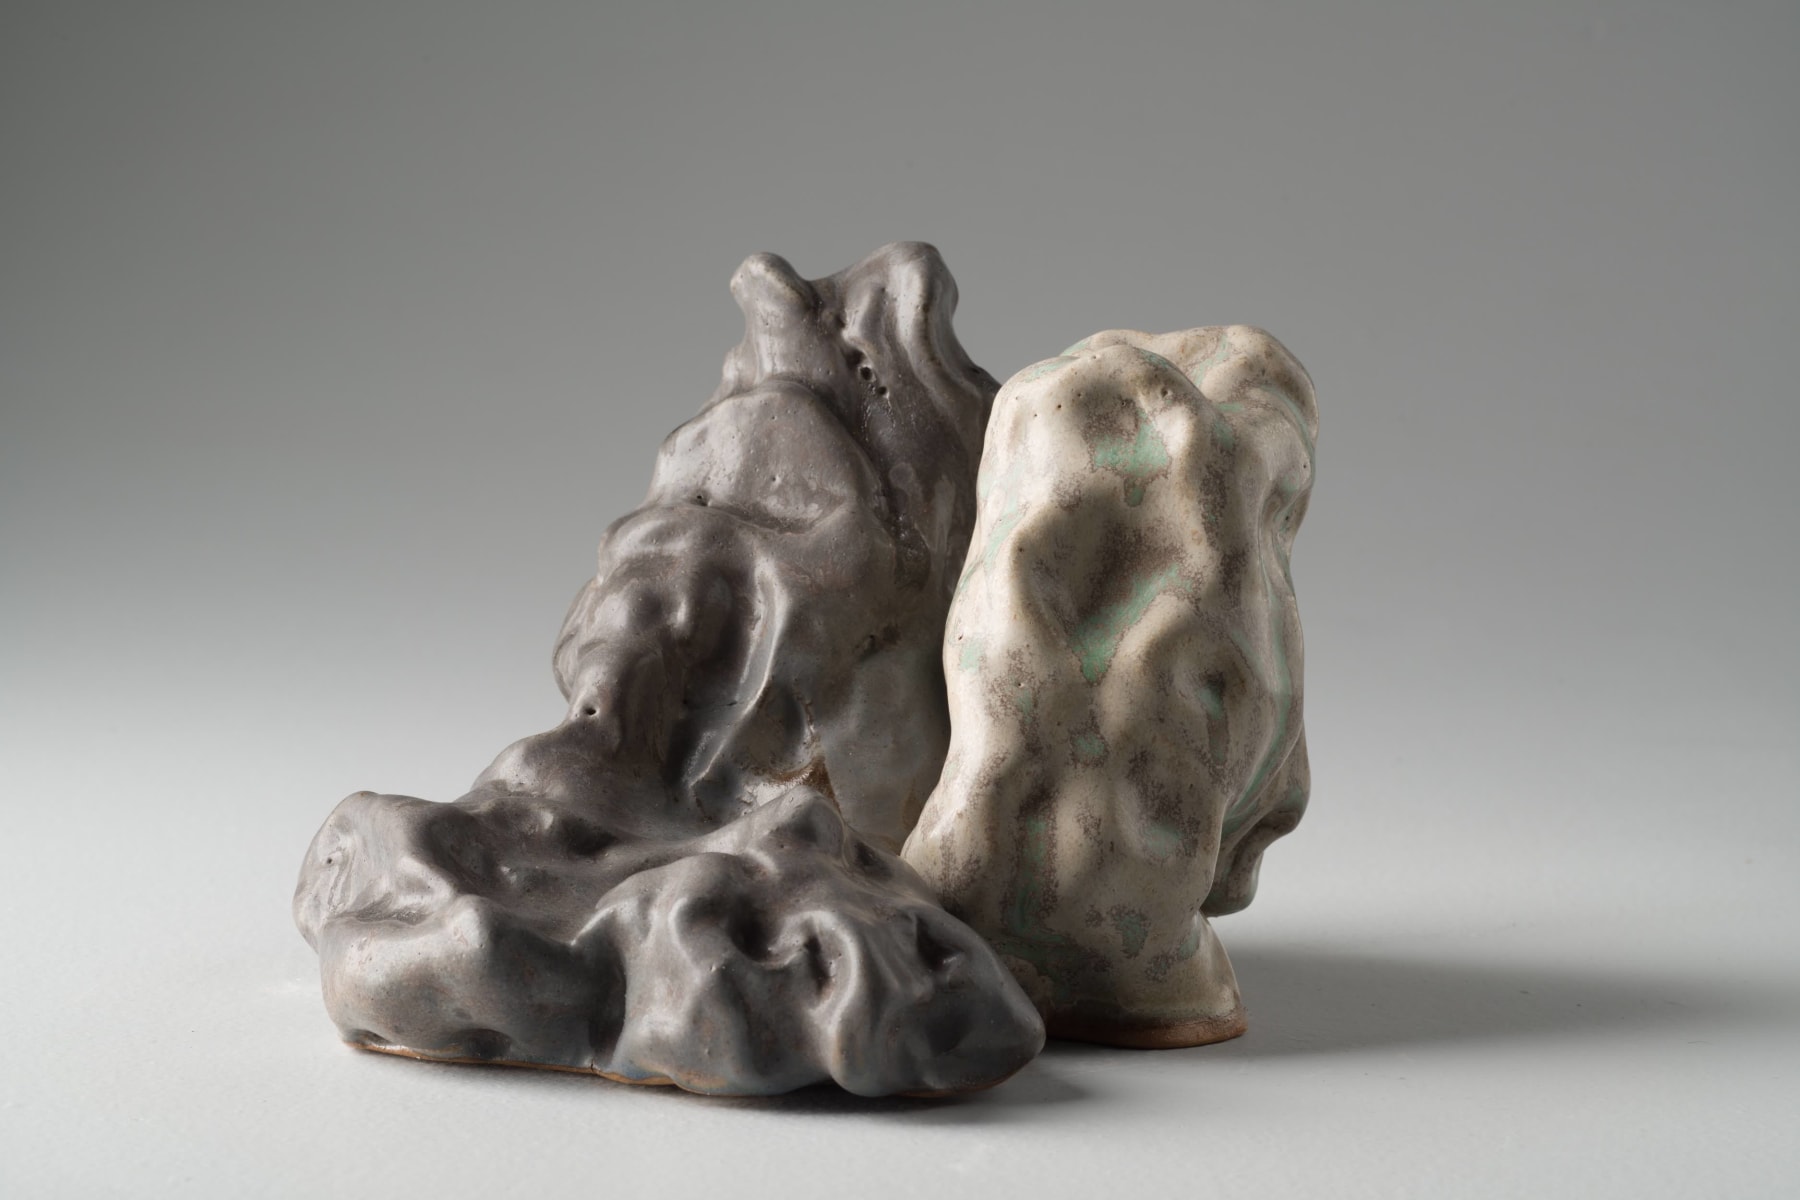 V4 dido Sculptural From Glaze on Stoneware 16 x 19 x 19 cm AUD $1400